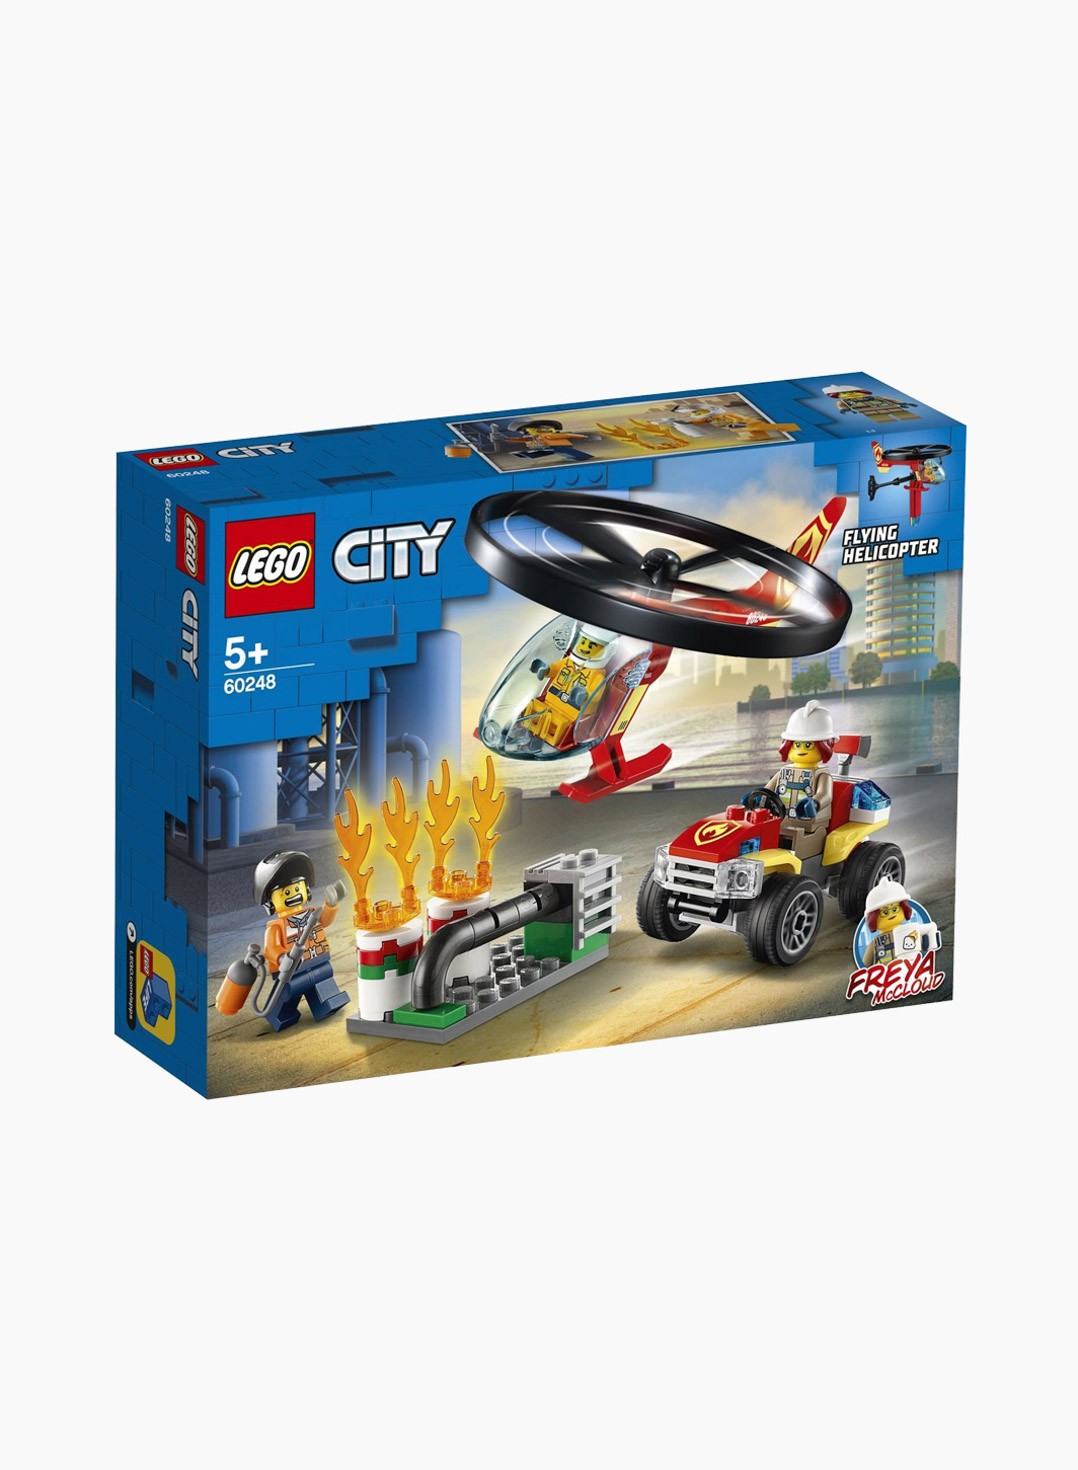 Lego City Constructor Fire Helicopter Response